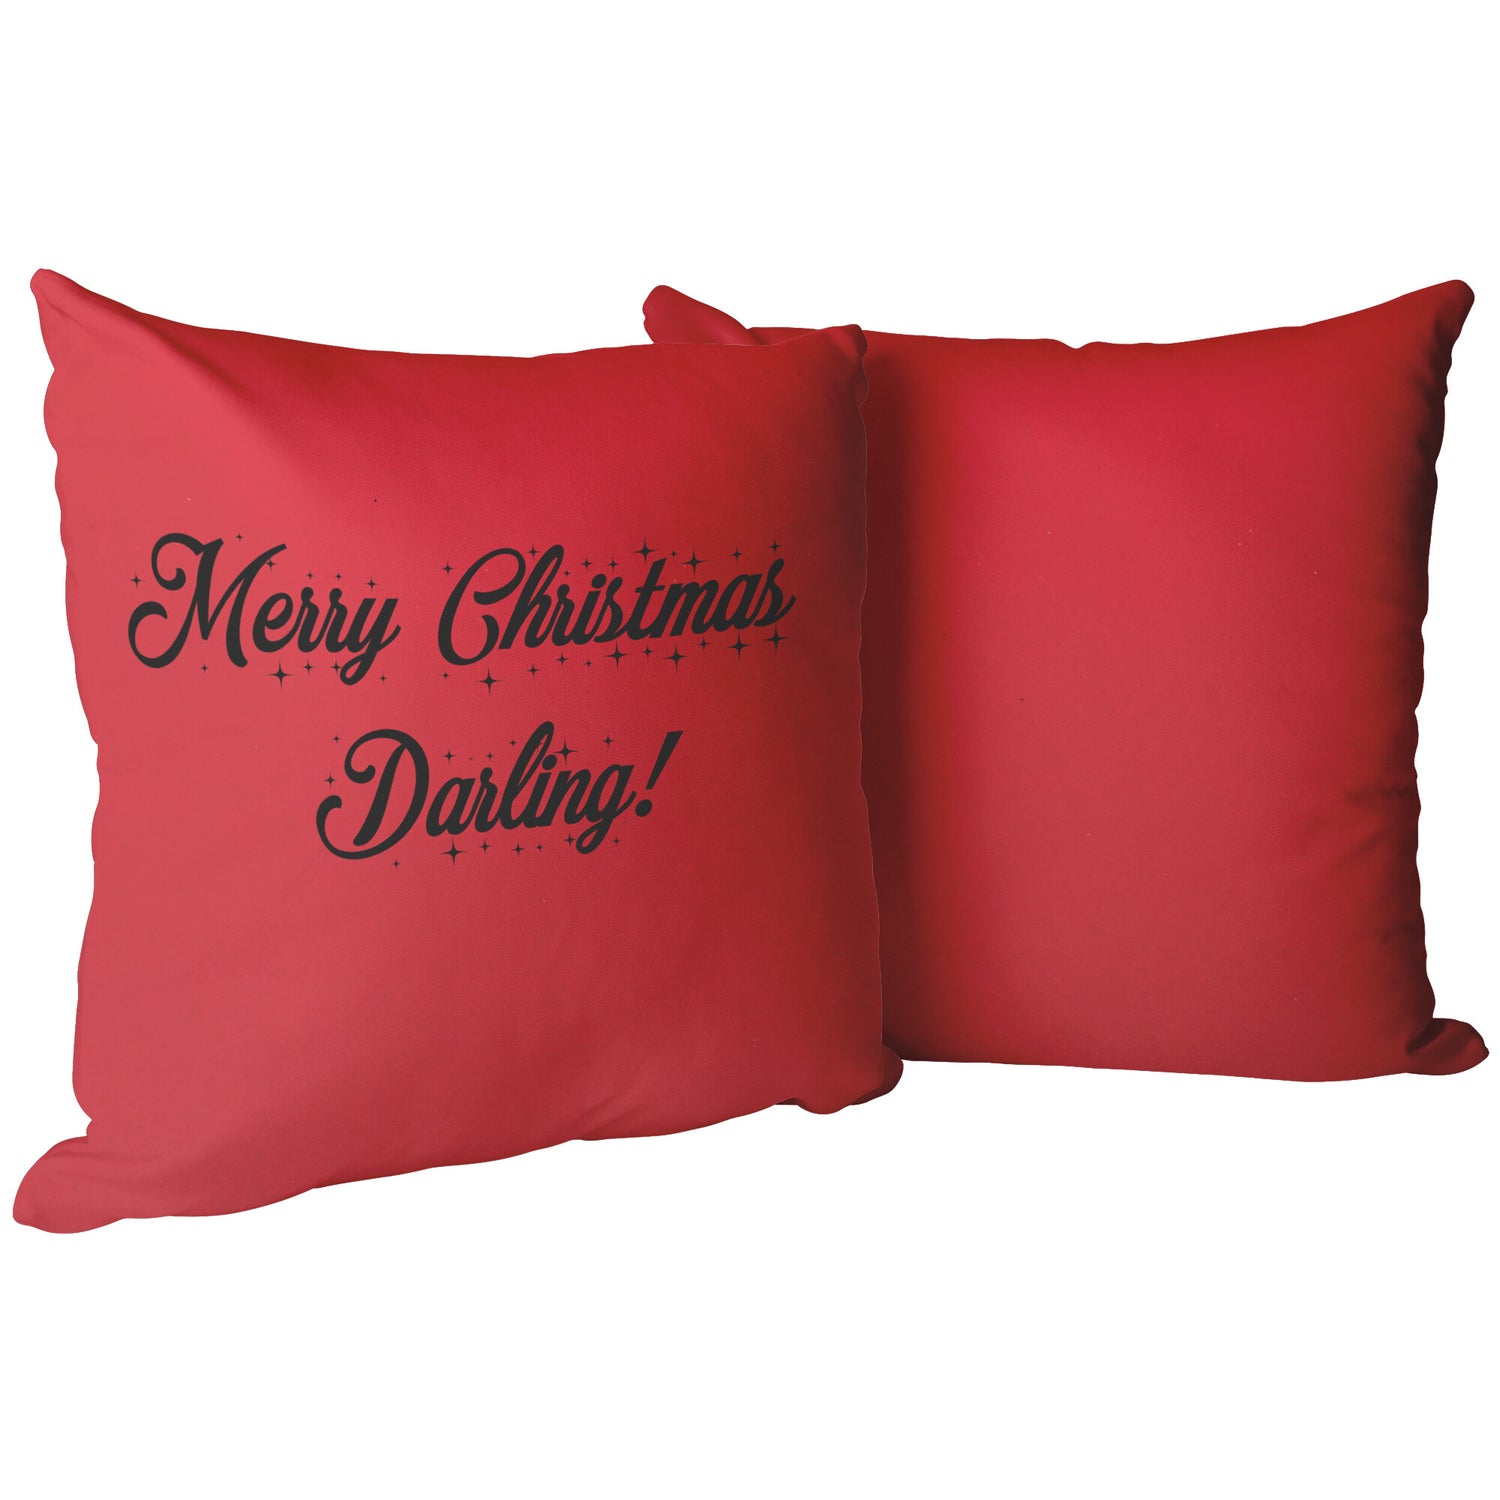 Merry Christmas Darling! Red/Black Pillow - Signs and Seasons Gifts